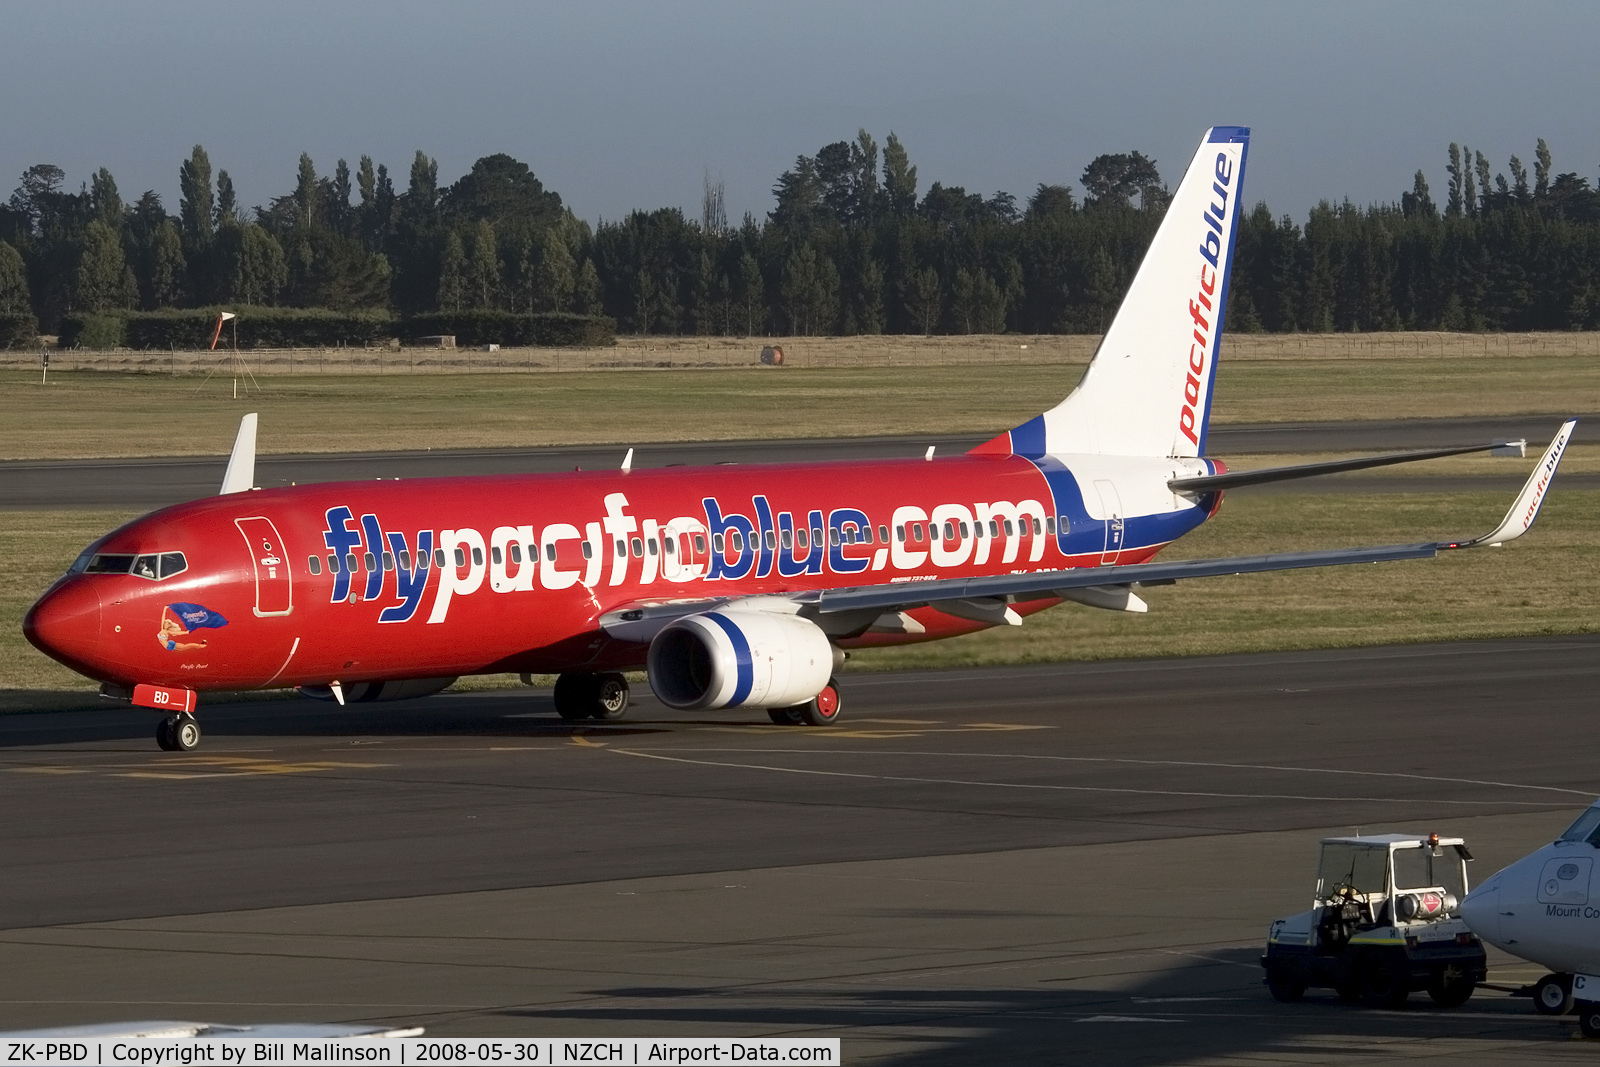 ZK-PBD, 2004 Boeing 737-8FE C/N 33996, taxi to gate after landing on 02